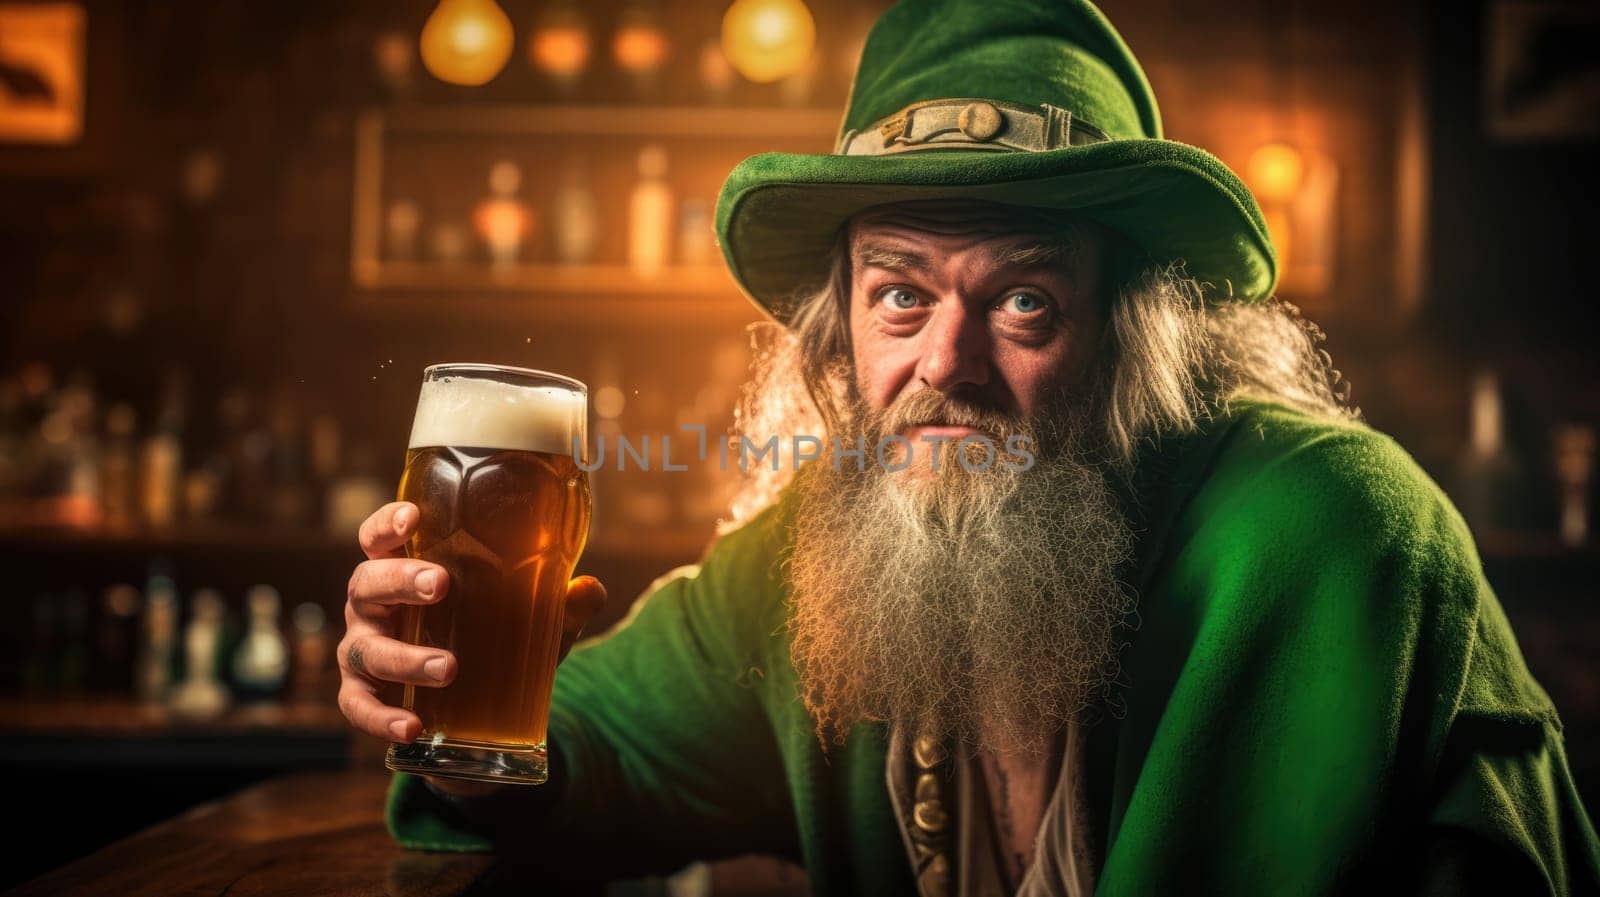 Senior man in green suit and hat holding beer mug for St Patricks Day celebration by JuliaDorian